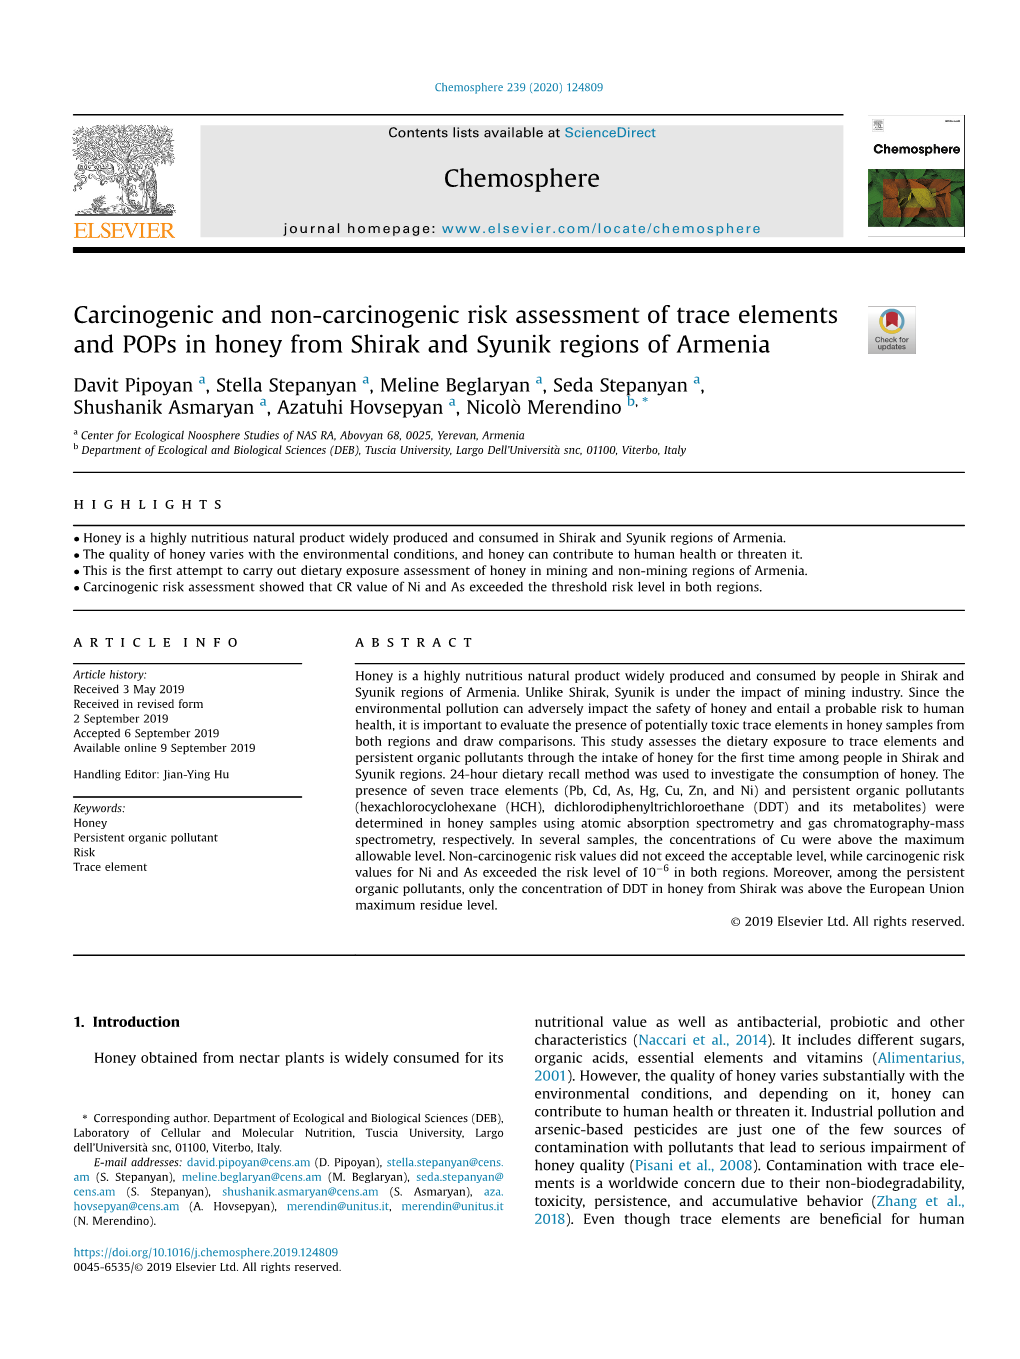 Carcinogenic and Non-Carcinogenic Risk Assessment of Trace Elements and Pops in Honey from Shirak and Syunik Regions of Armenia